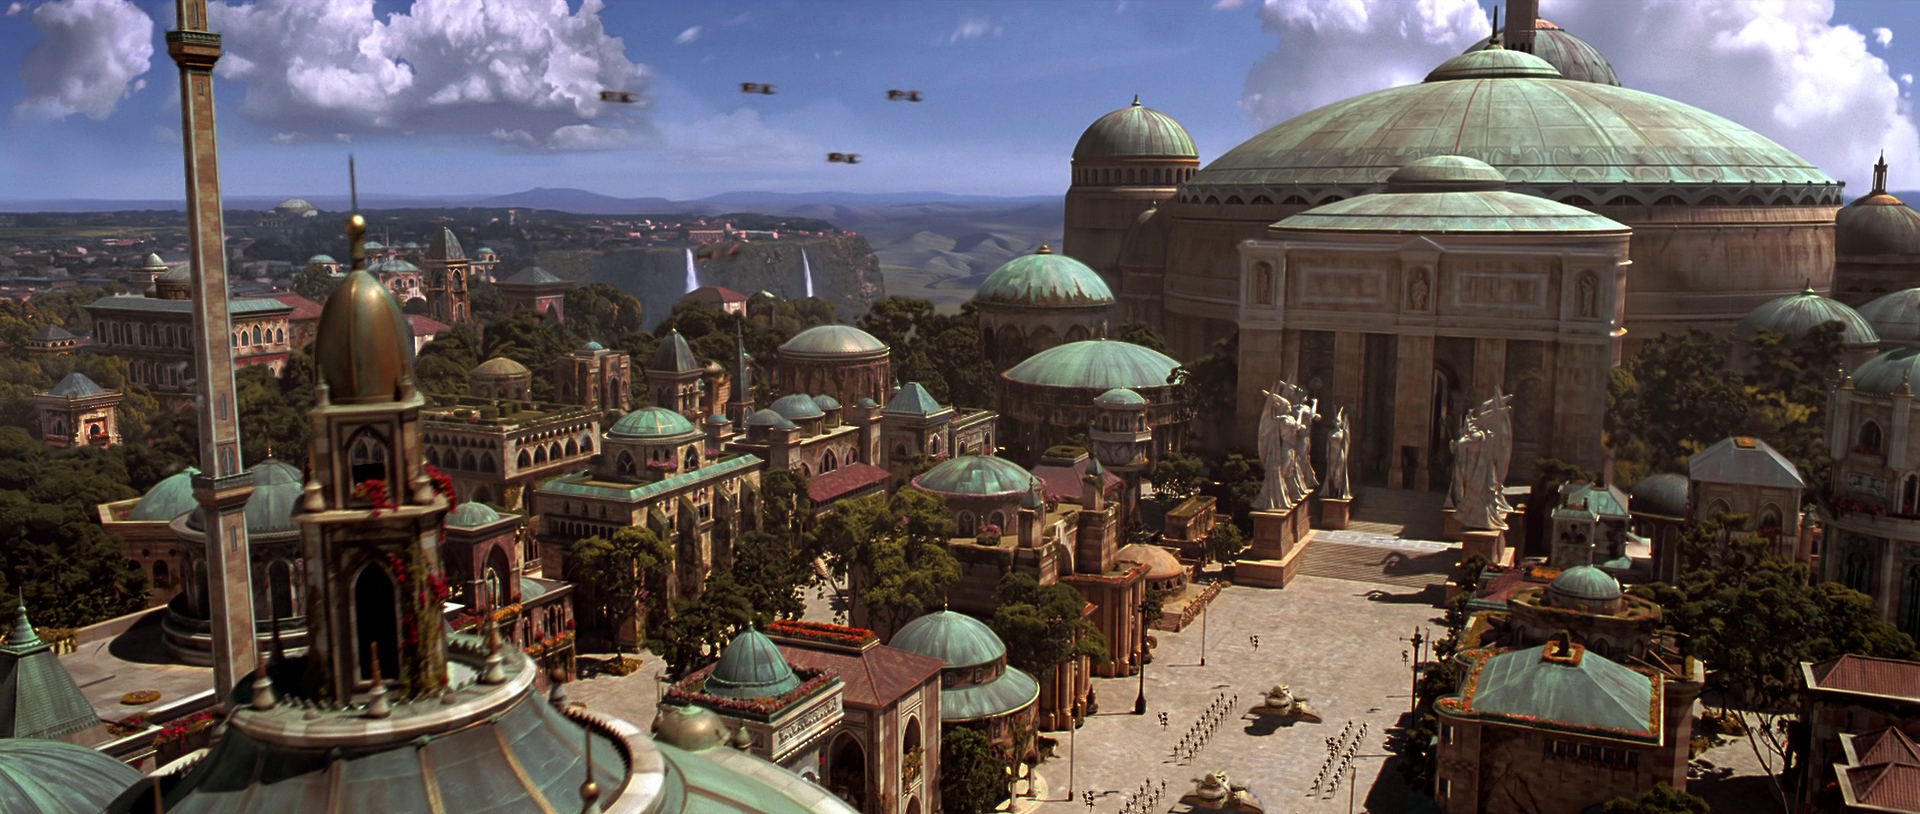 Naboo: Theed Assault Map mod for Star Wars Battlefront II.